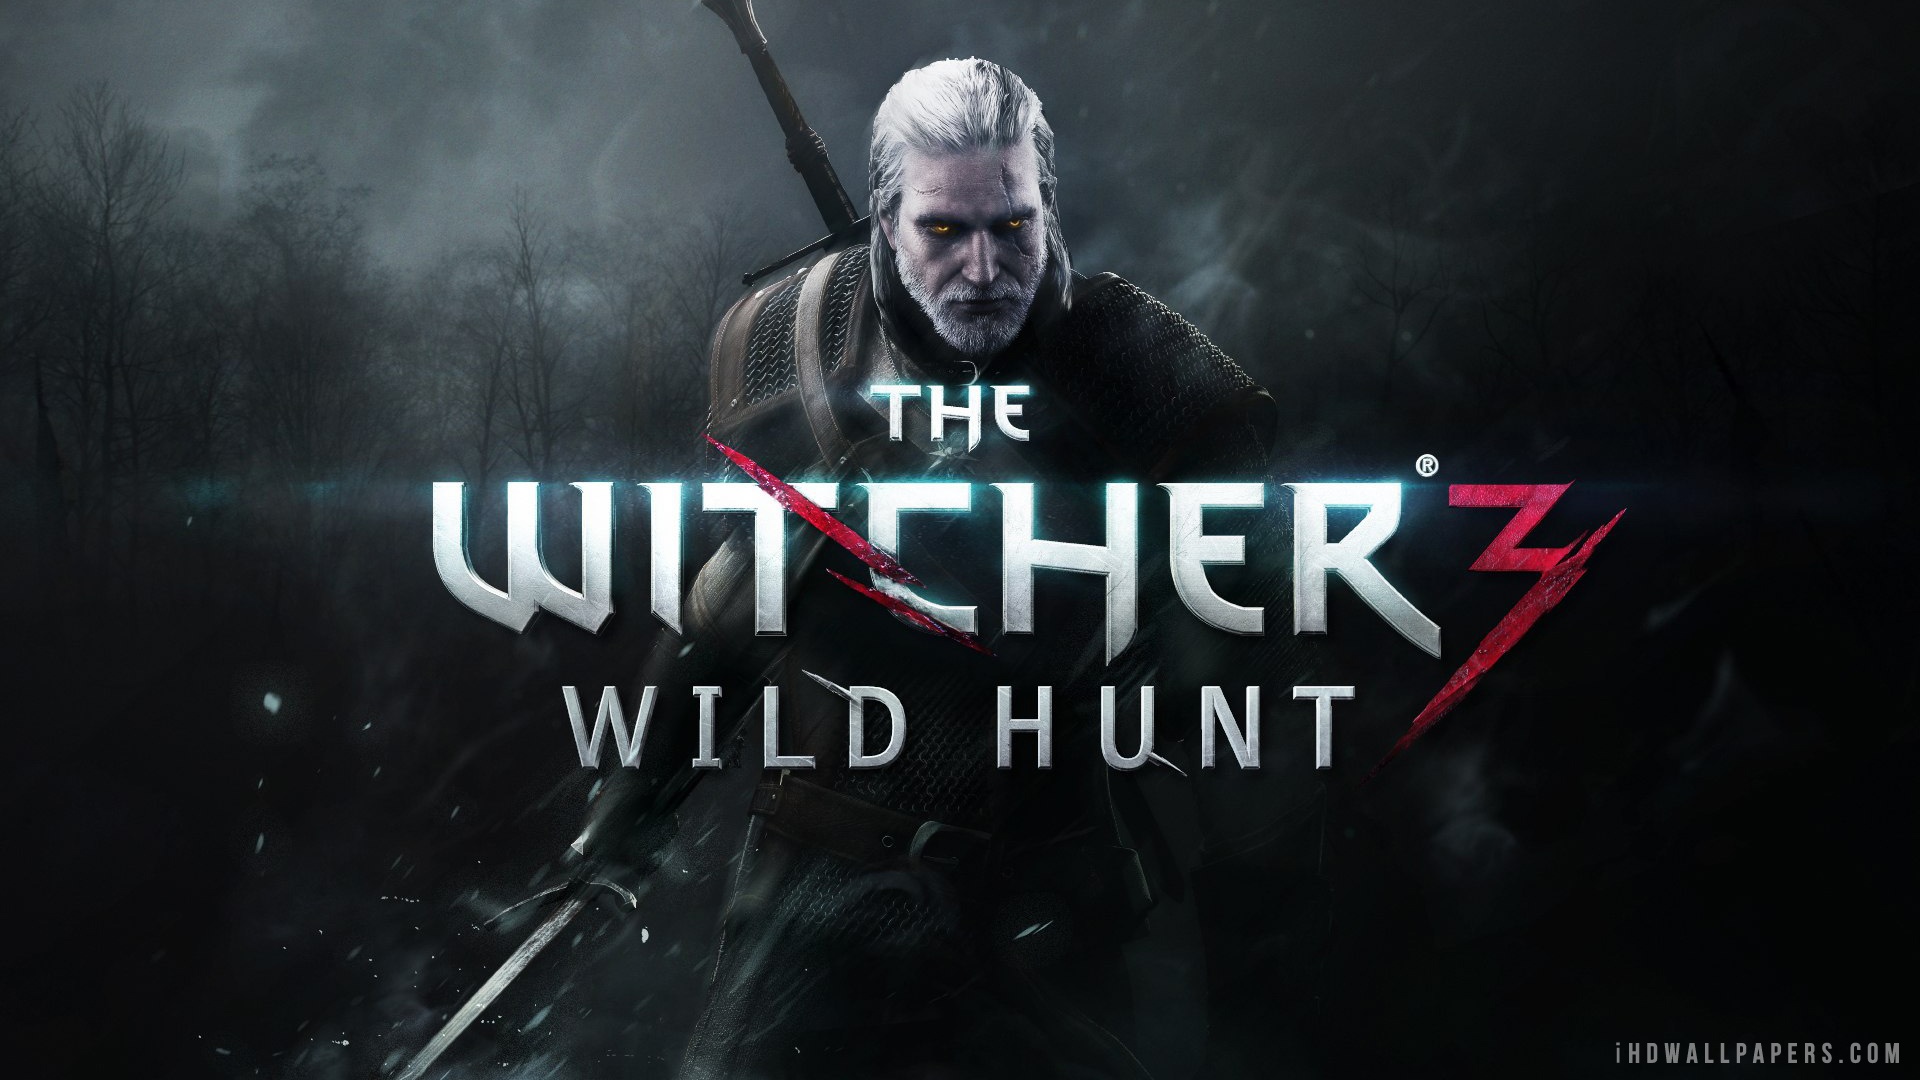 2014 The Witcher 3 Wild Hunt HD Wallpaper   iHD Wallpapers 1920x1080